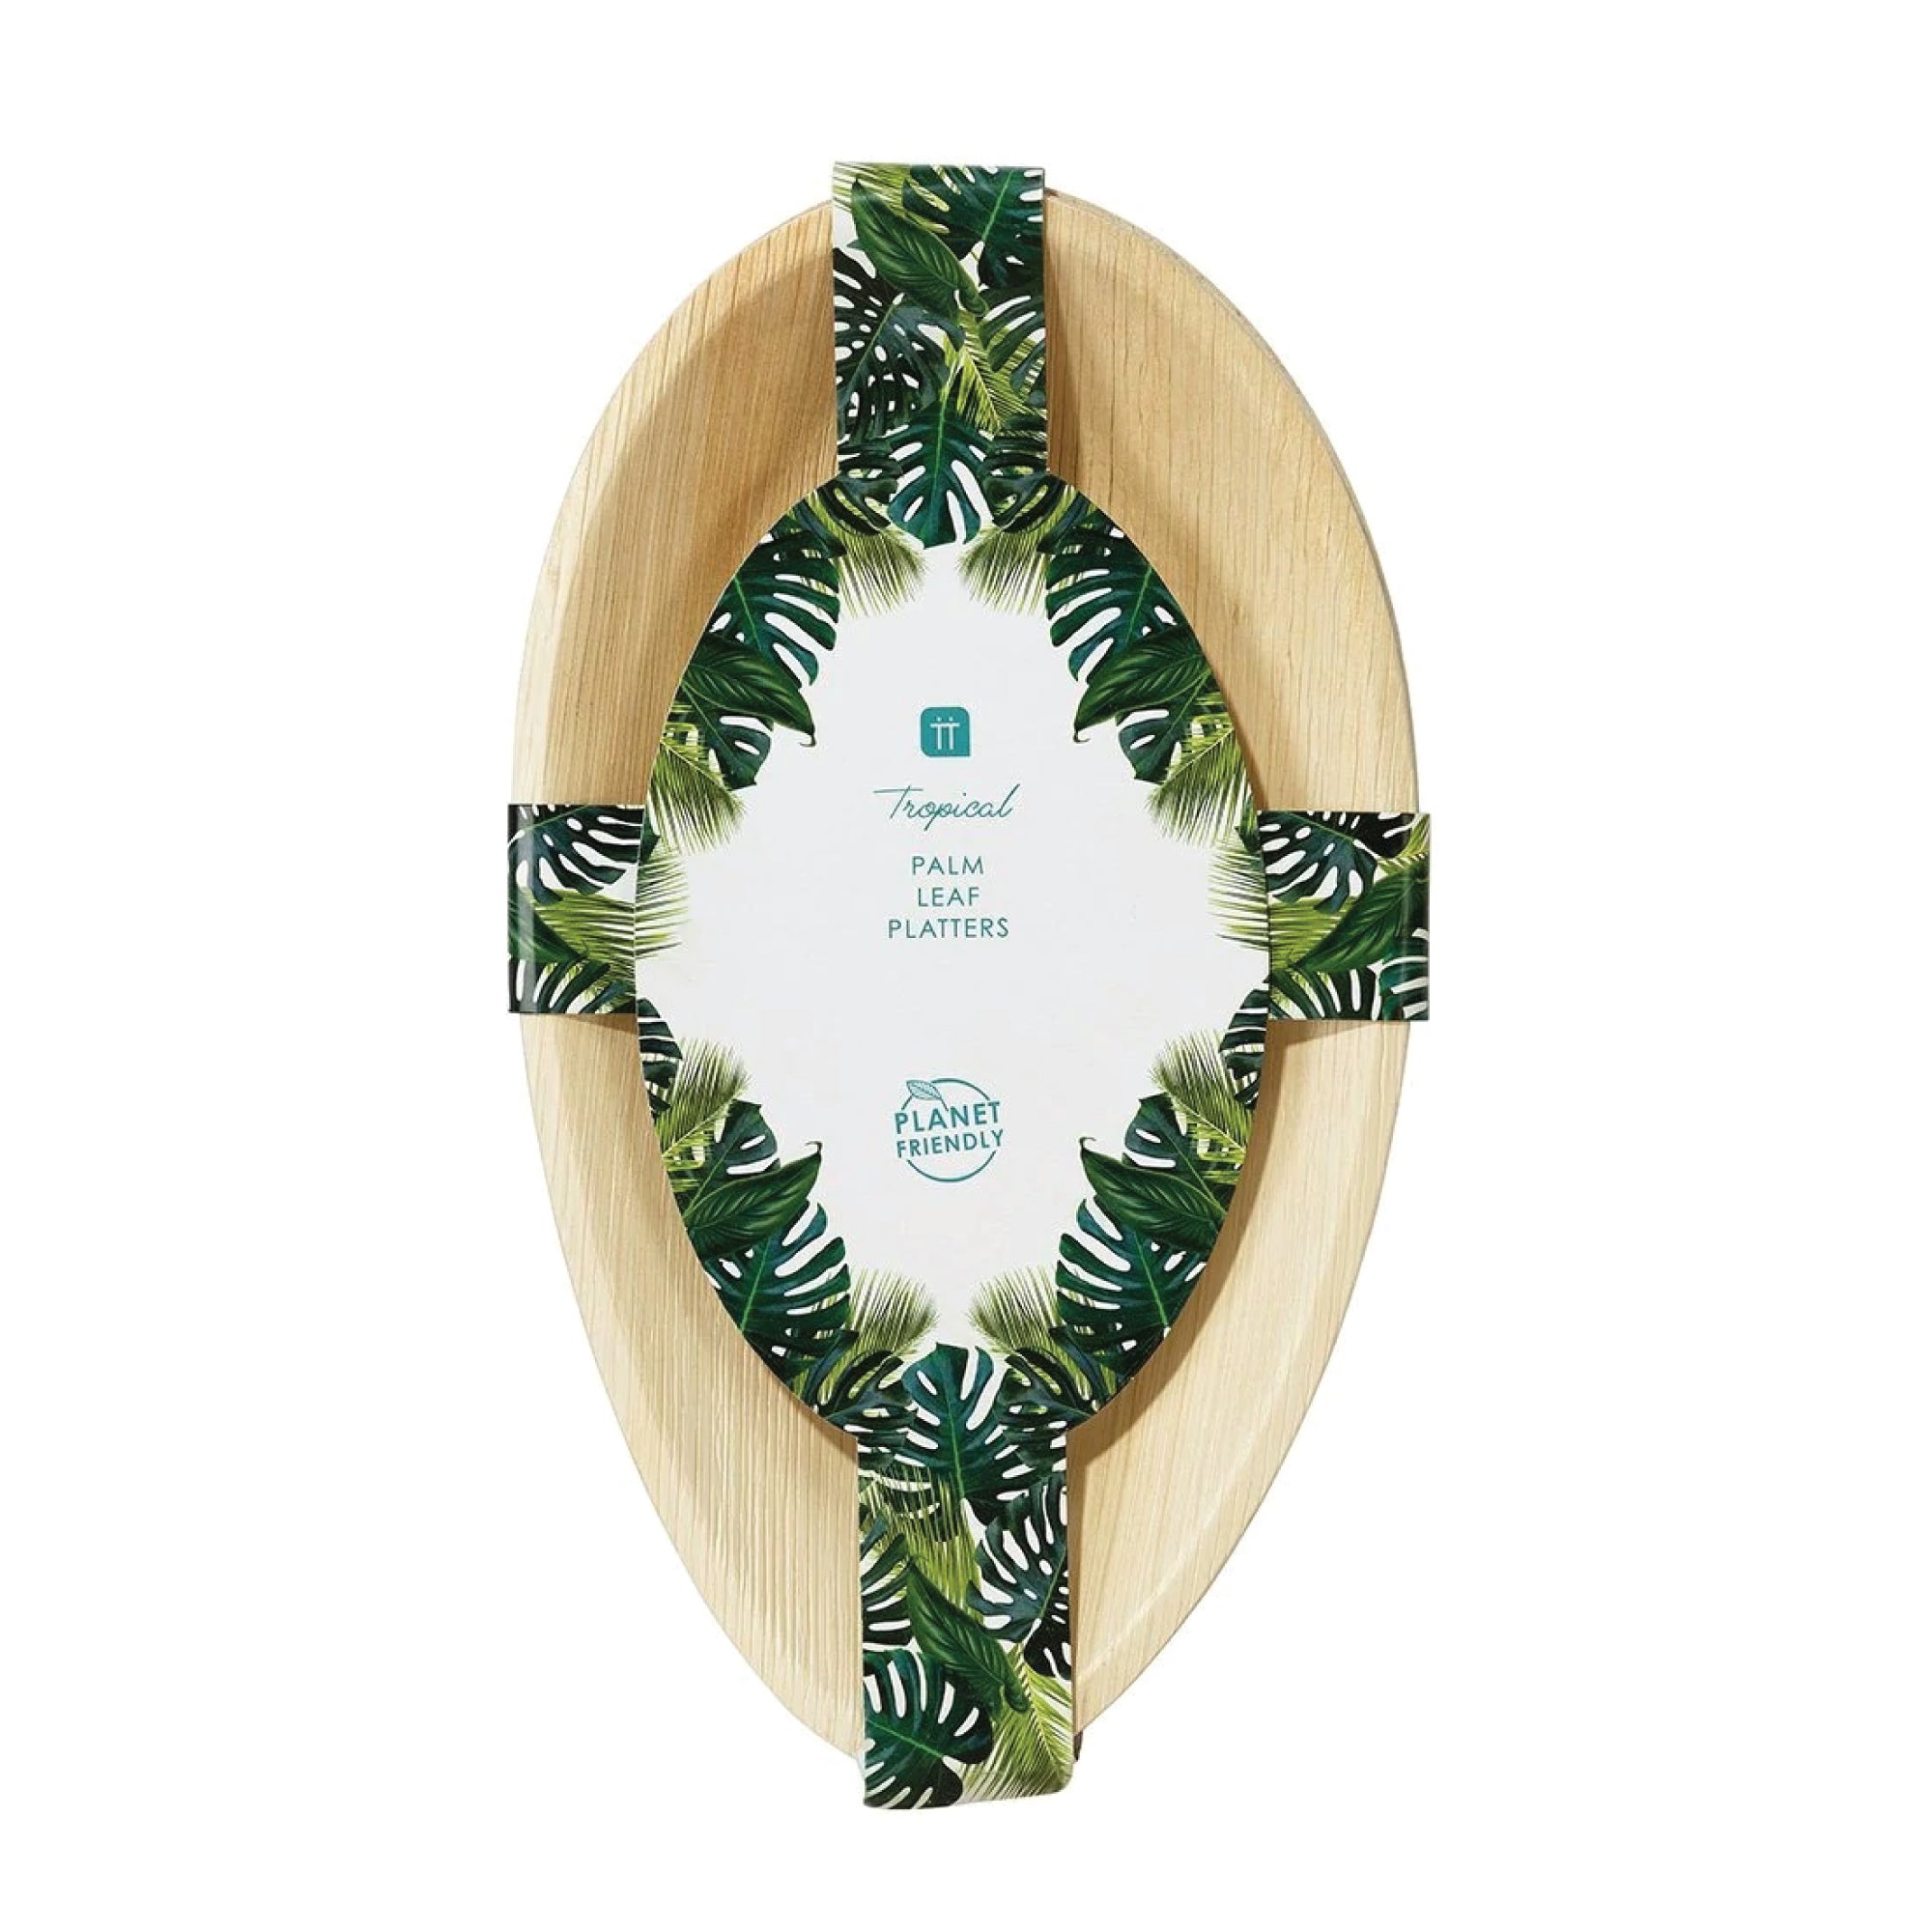 Tropical Palm Leaf Platters 6ct | The Party Darling